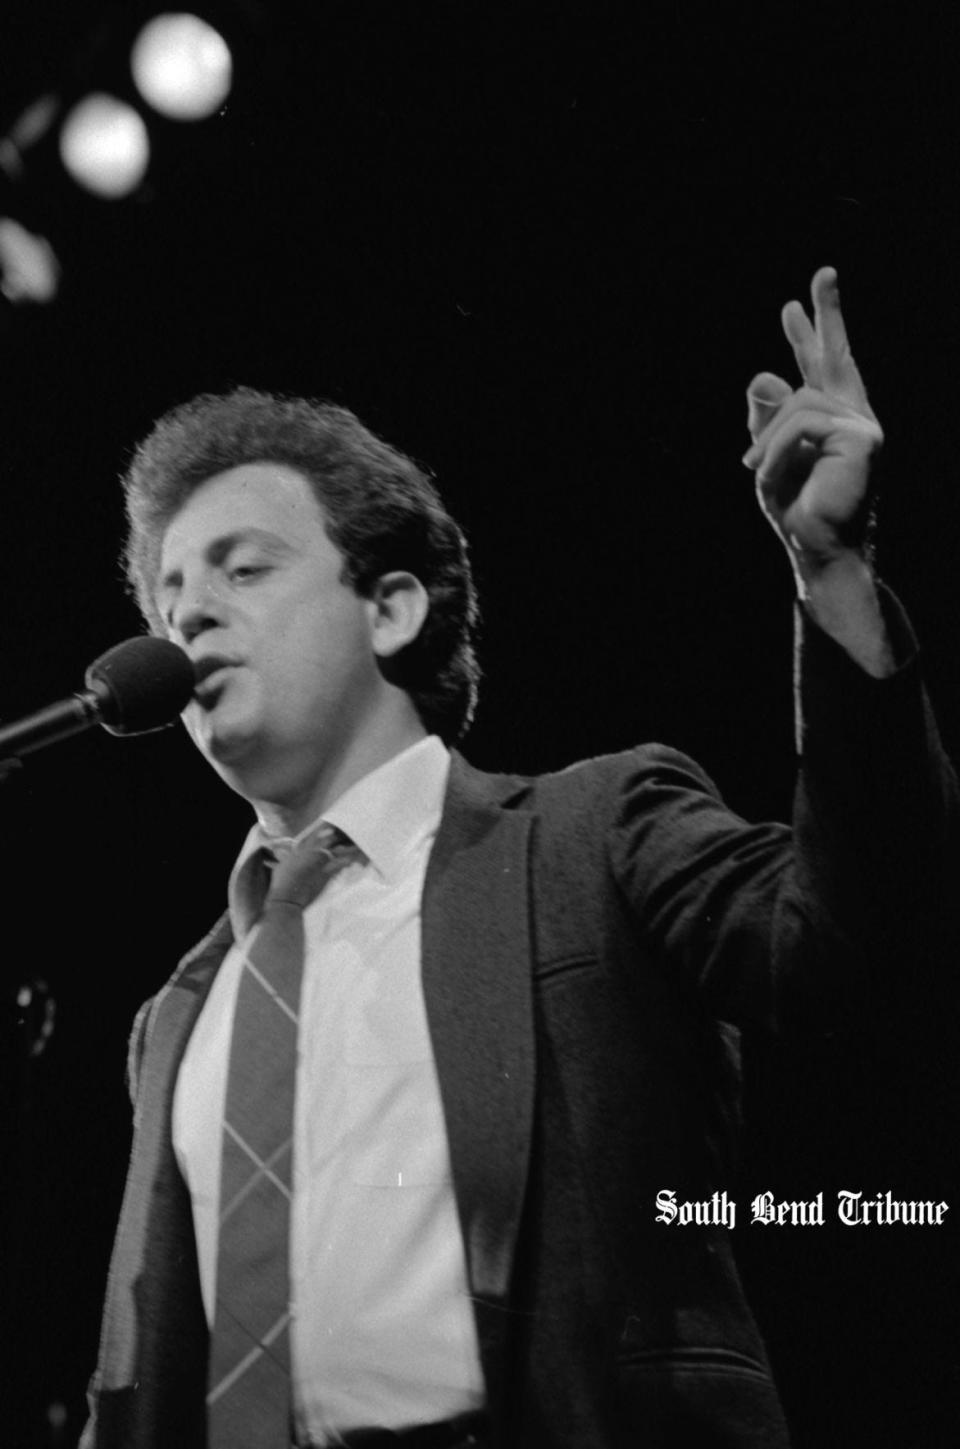 Singer-songwriter and pianist Billy Joel plays to a sold-out crowd in February 1984 at the University of Notre Dame's Joyce Center. Joel was joined on stage for one number by then-girlfriend (and his future wife) model Christie Brinkley.